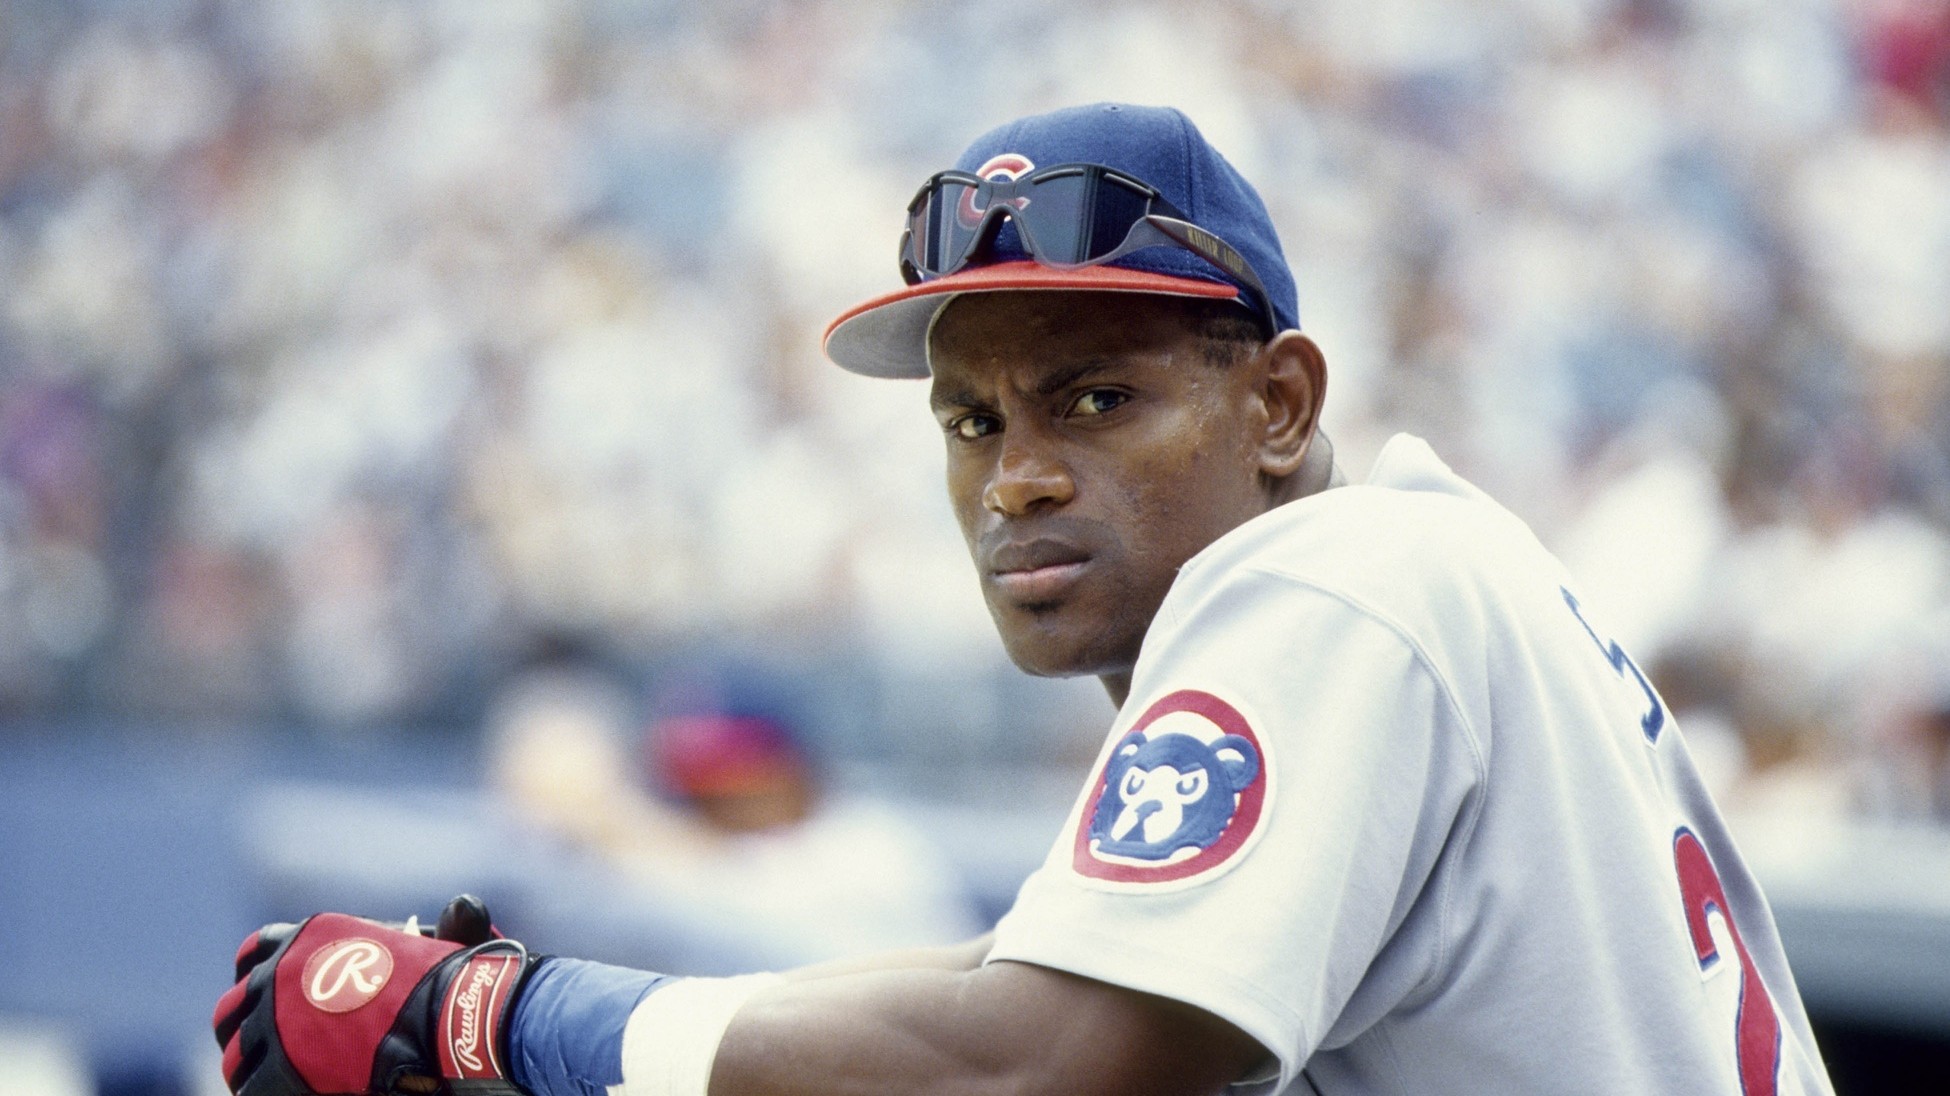 hall-of-fame-voters-are-forgiving-ped-use-but-that-wont-help-sammy-sosa-1484840453.jpg